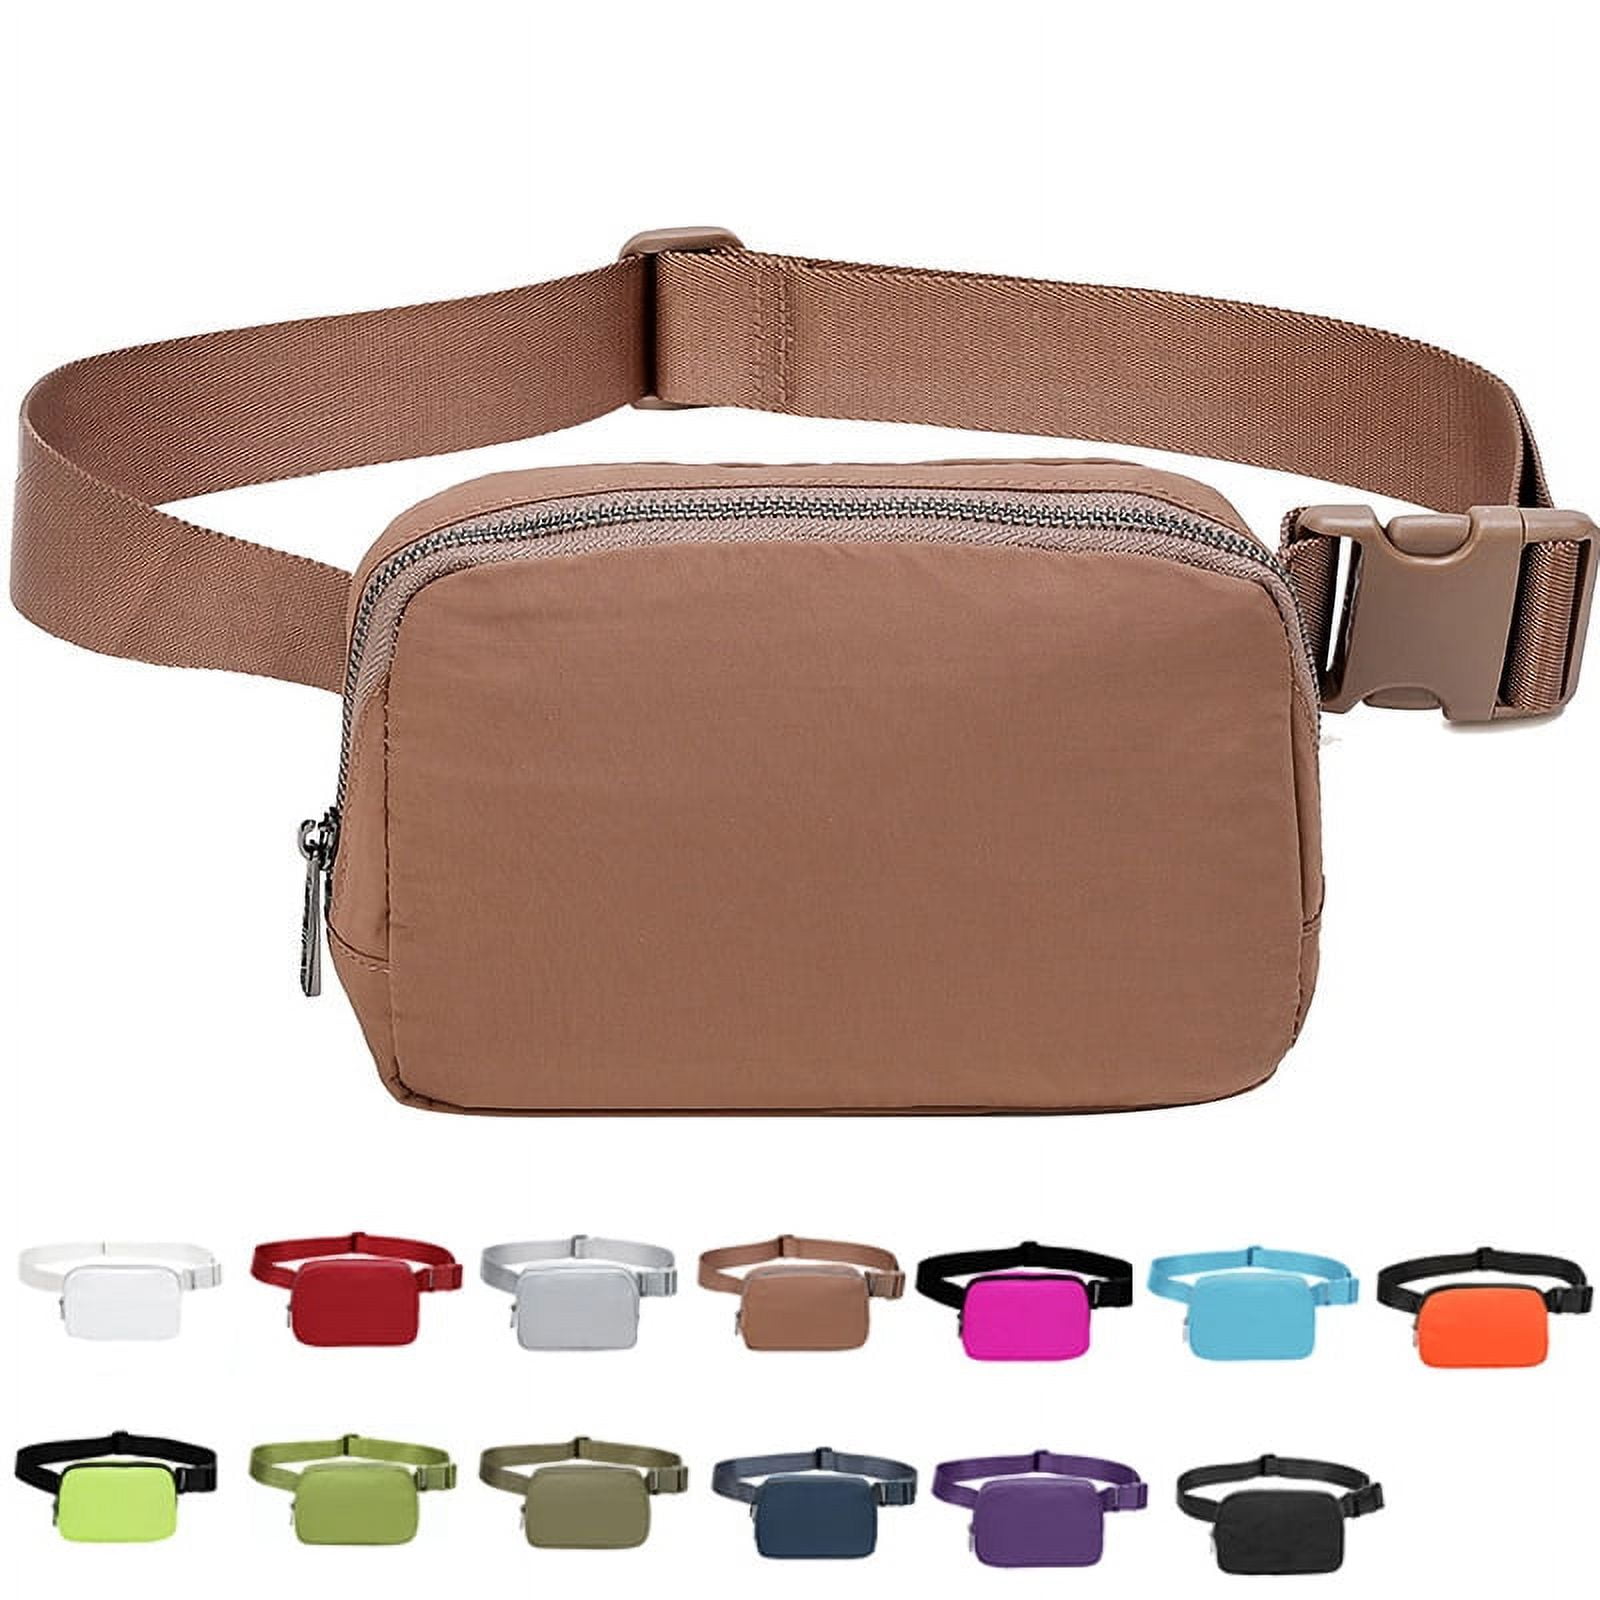 Buy TUCKER Waist Bag for Women and Men/Fanny Pack with 3-Zipper Pockets  Waist Pouch for Hiking, Travel, Camping, Running, Sports Outdoors and  Adventures Money Phone Belt with Adjustable Strap at